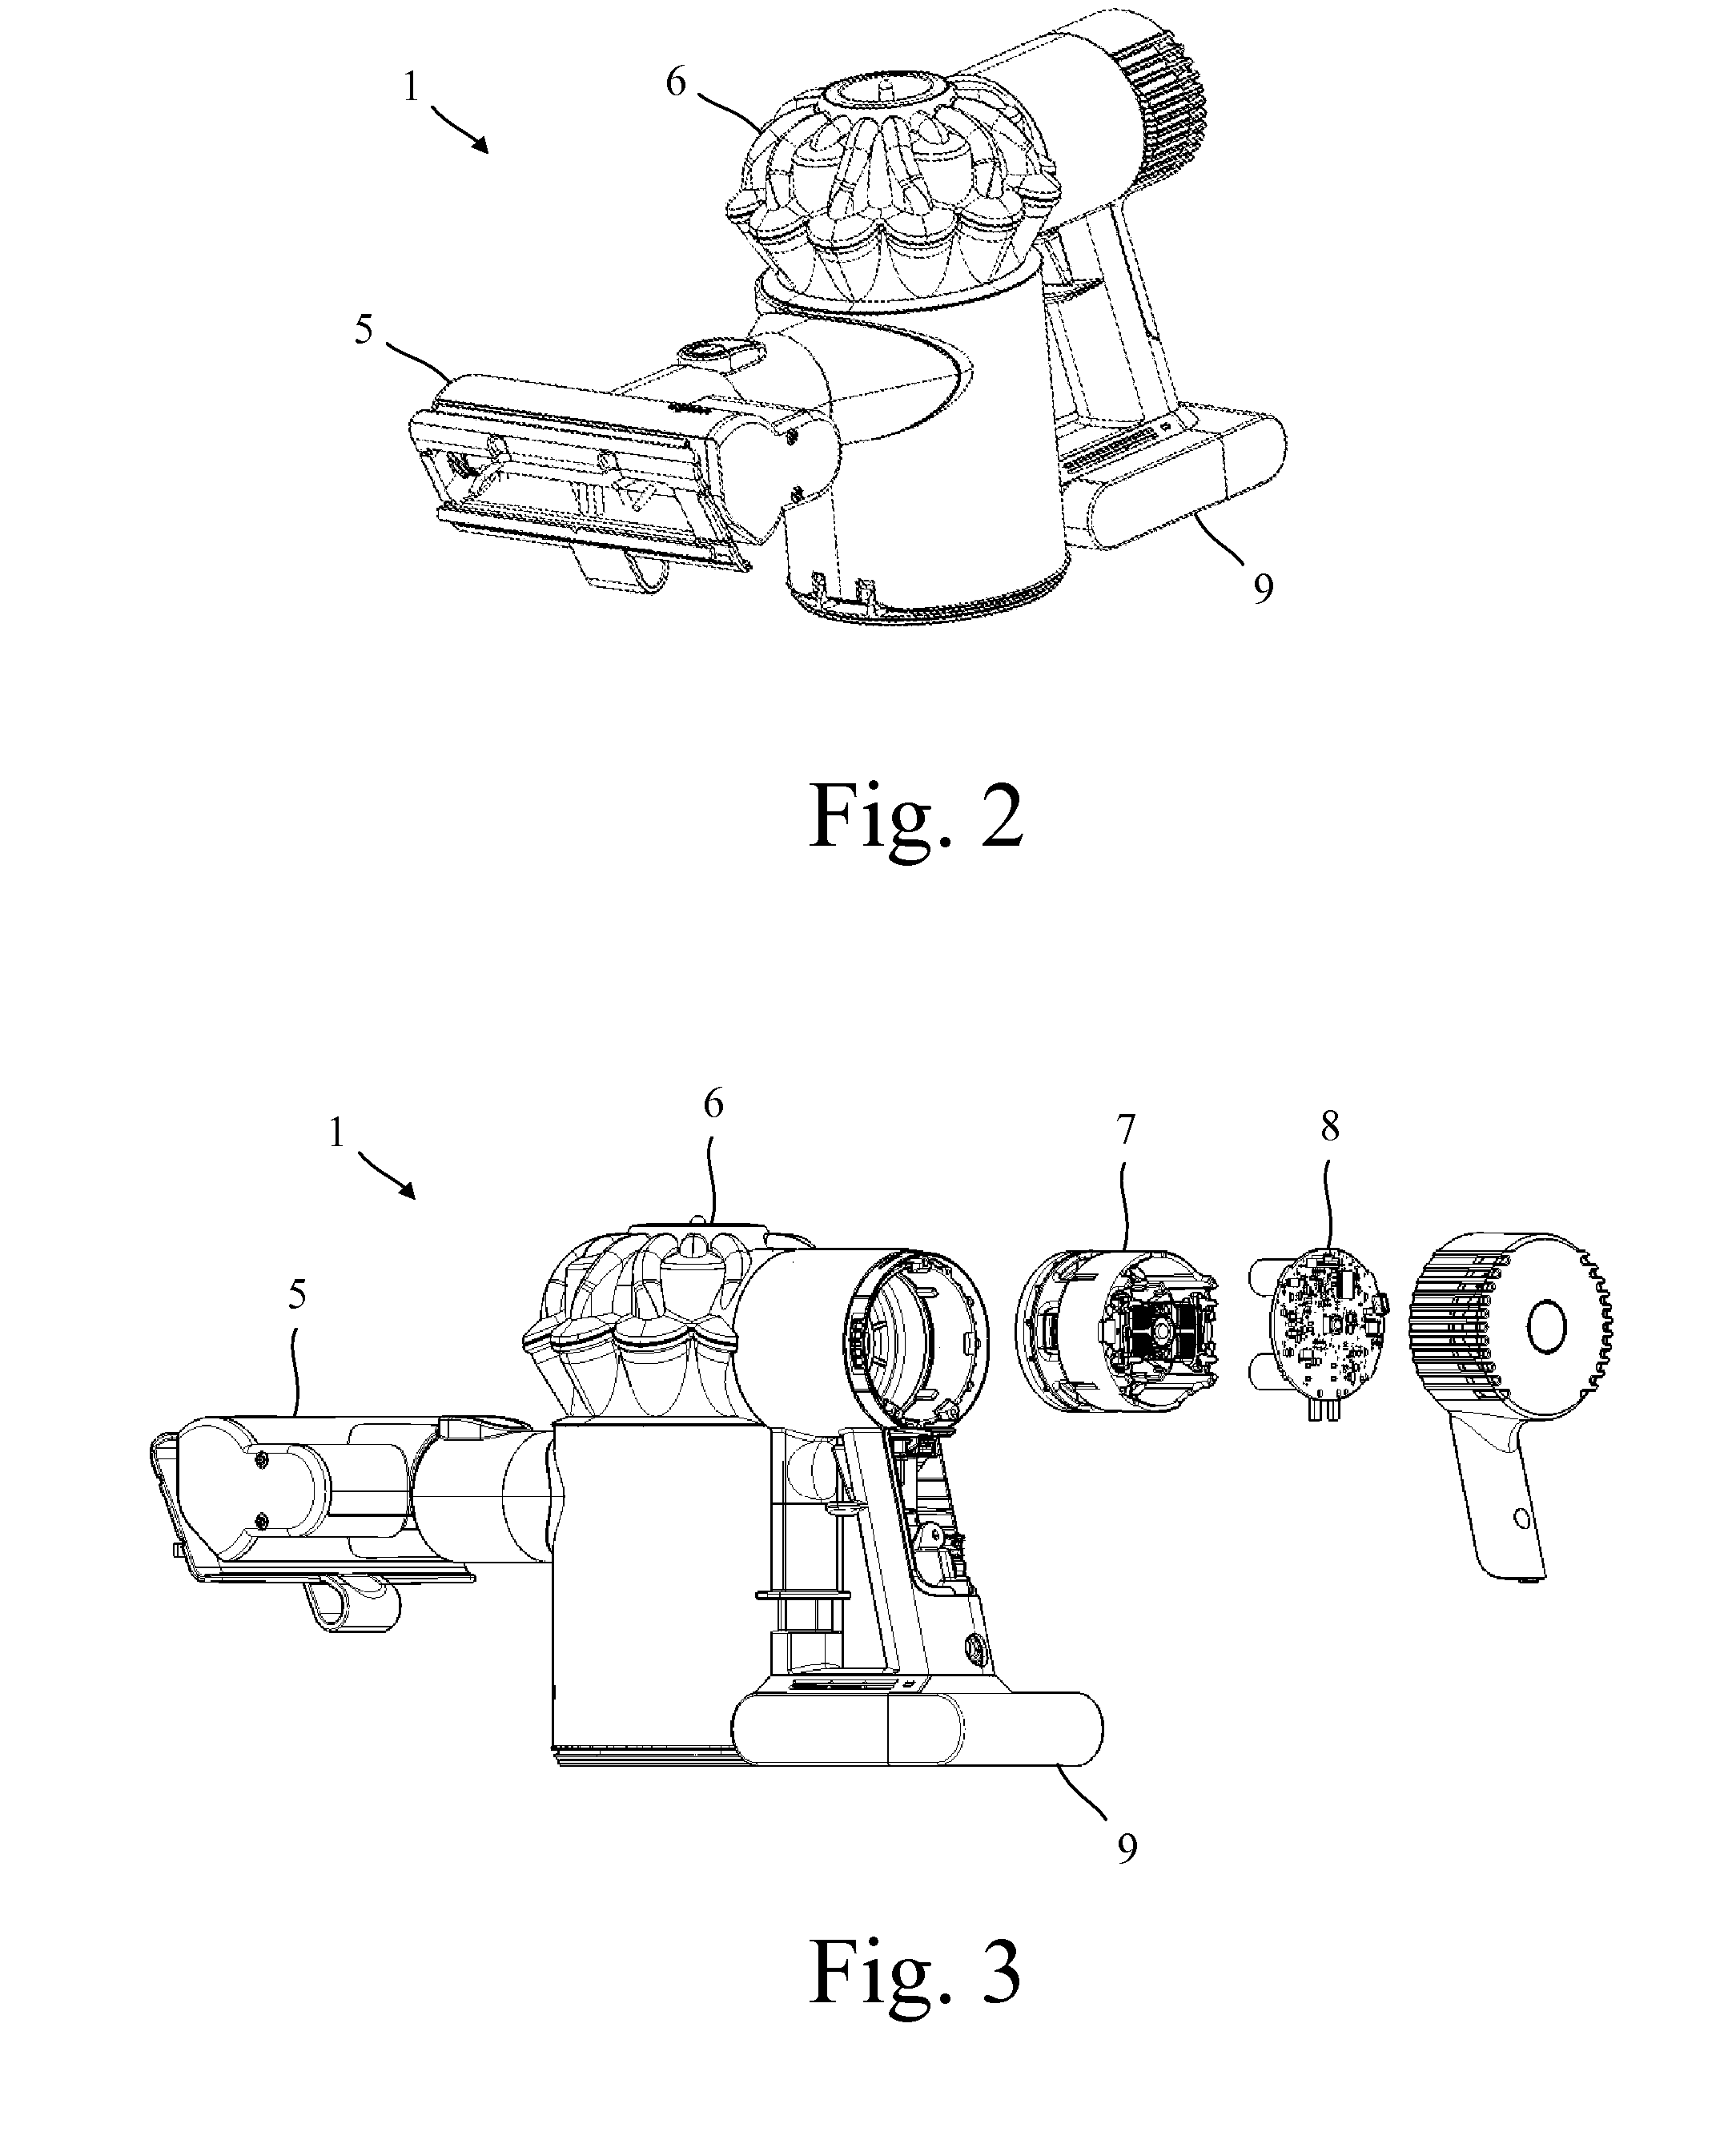 Surface cleaning appliance